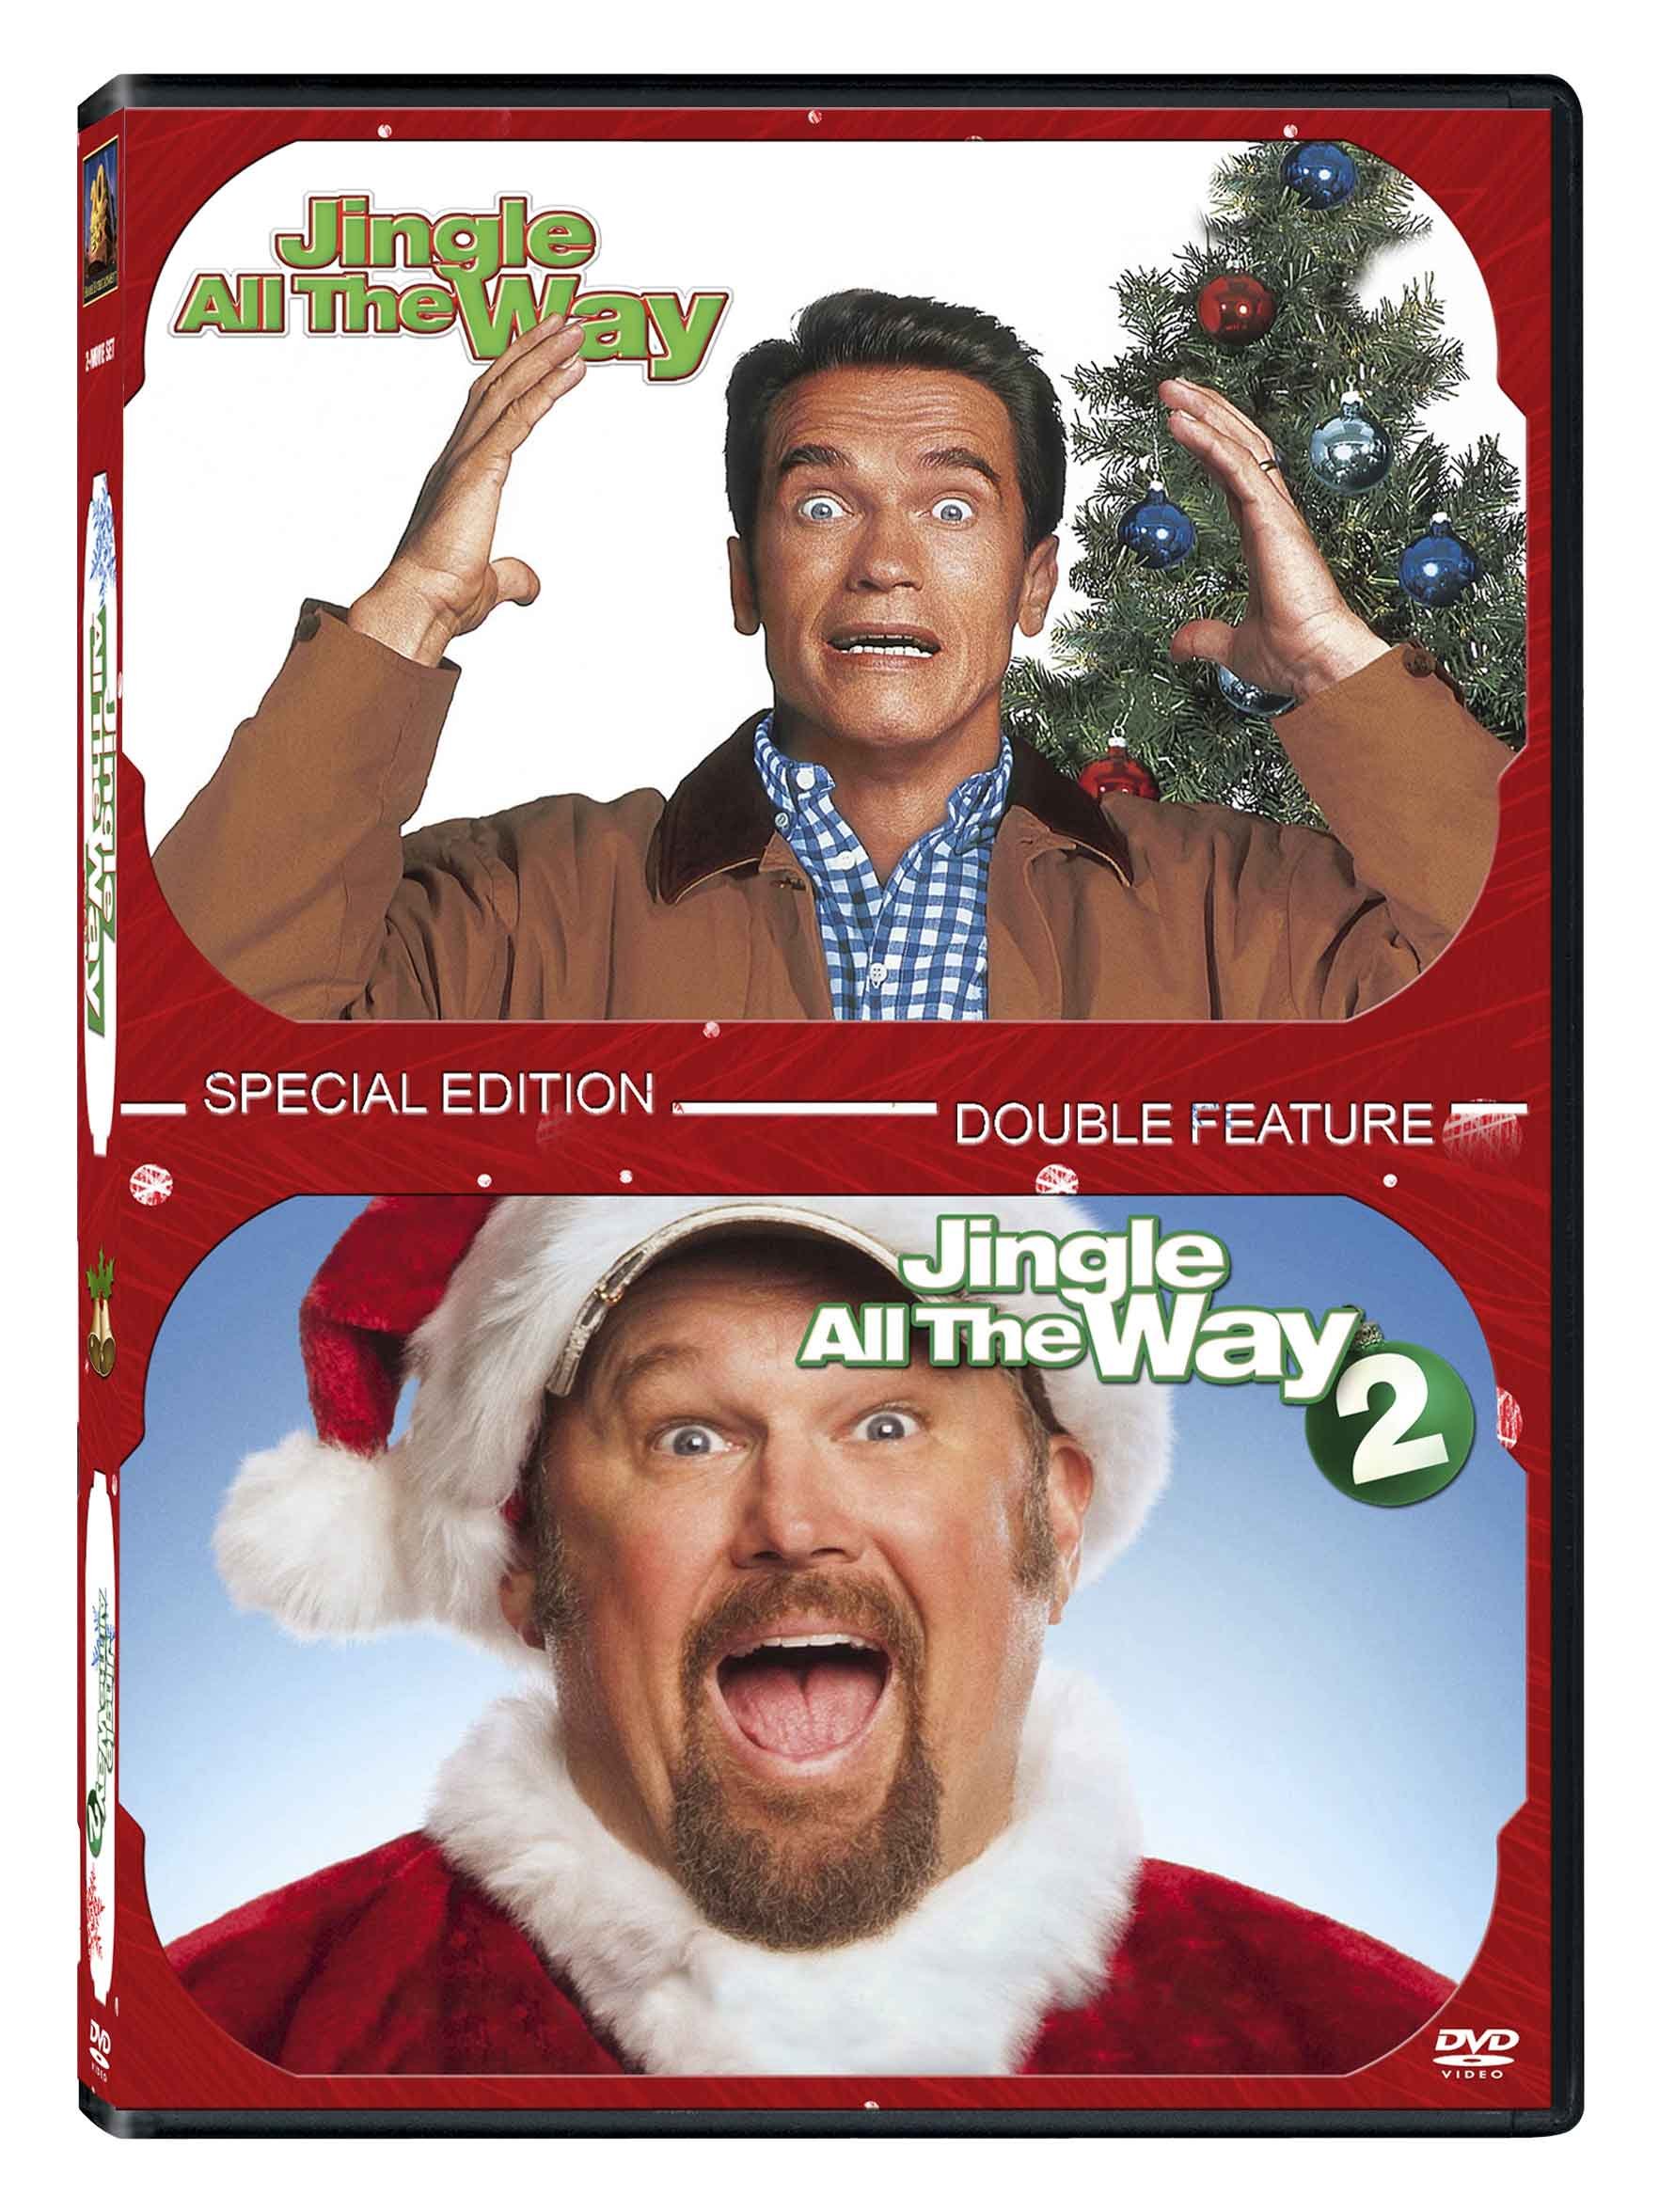 jingle-all-the-way-jingle-all-the-way-2-movie-purchase-or-watch-online